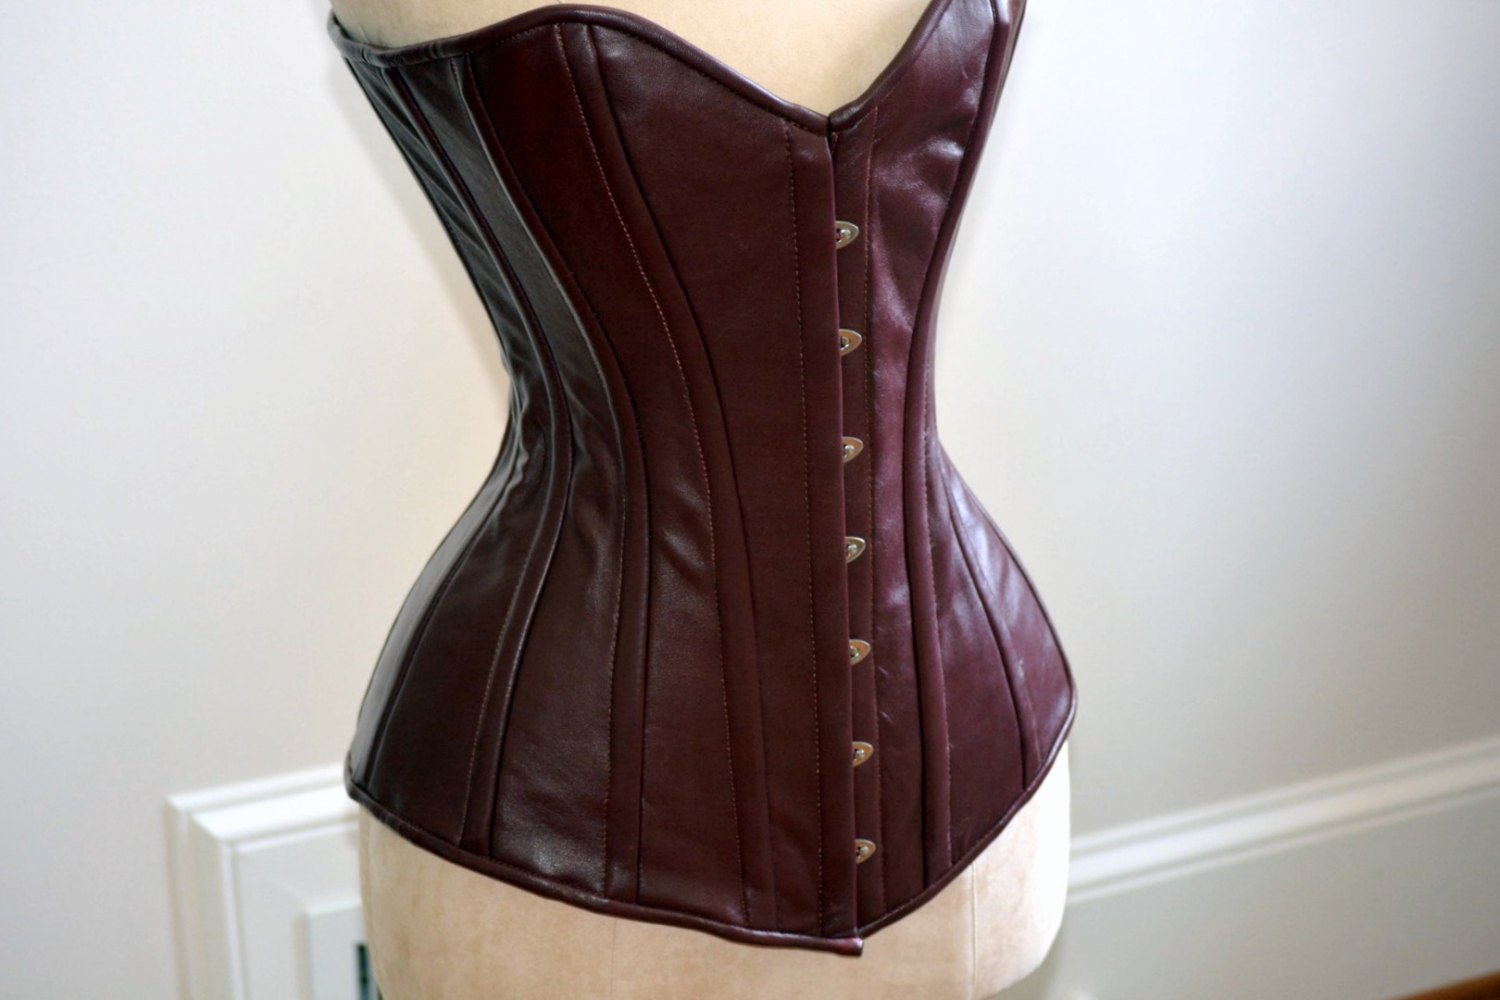 Real leather halfbust steel-boned authentic heavy corset, different colors,  gothic, alt, punk, steampunk, waist training, Pink leather corset